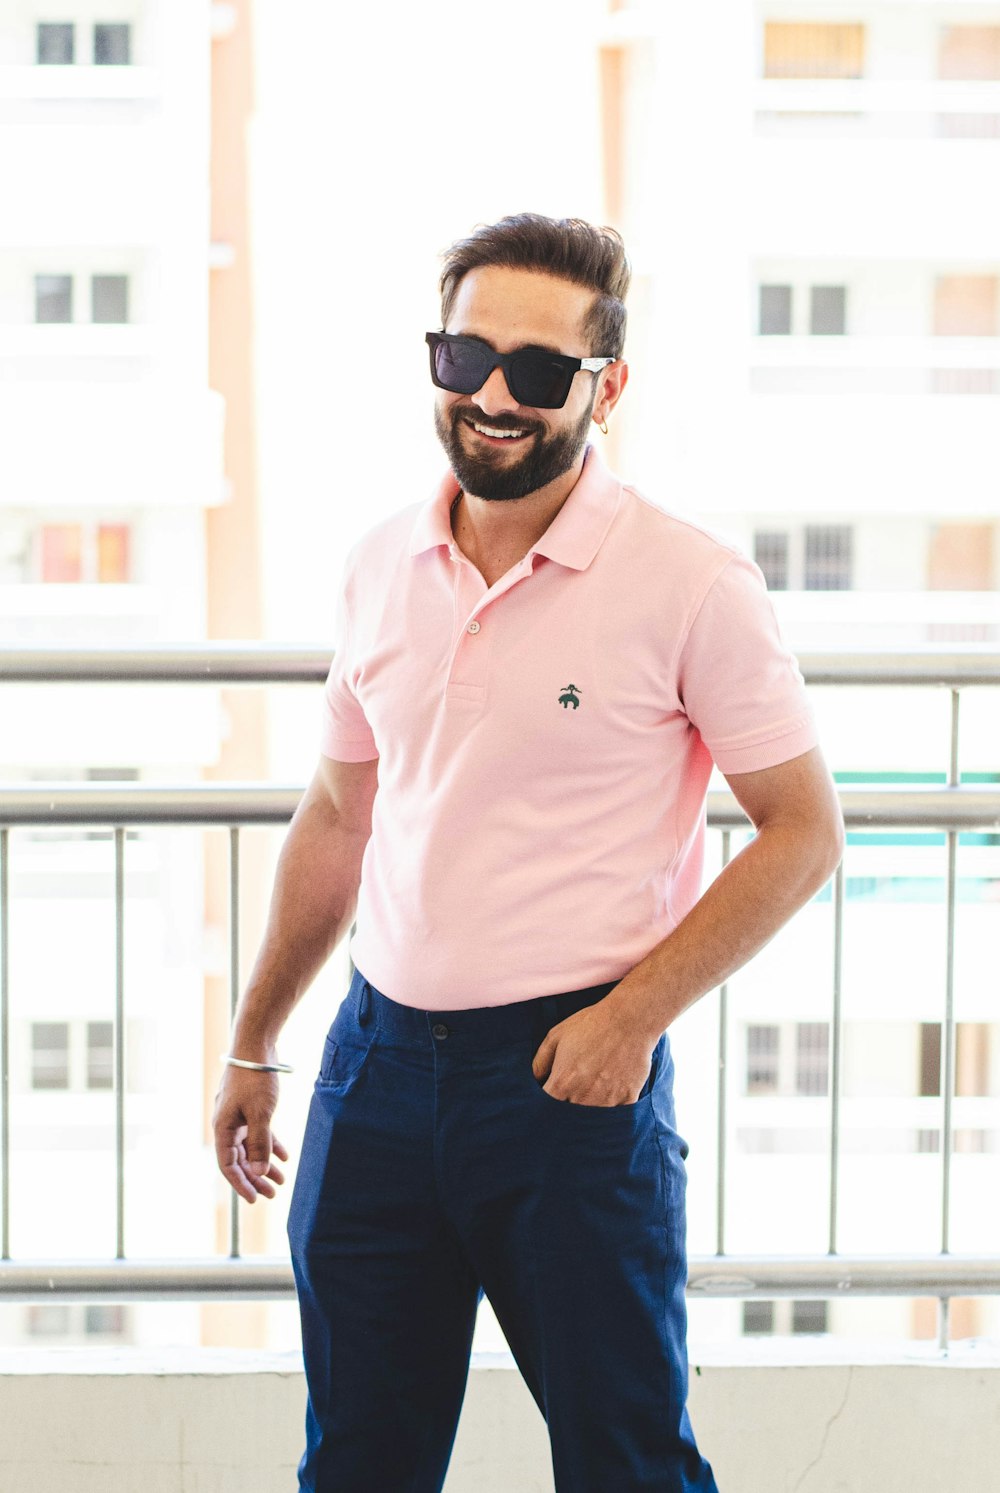 Man in pink polo shirt and blue denim jeans wearing black sunglasses photo  – Free Smile Image on Unsplash